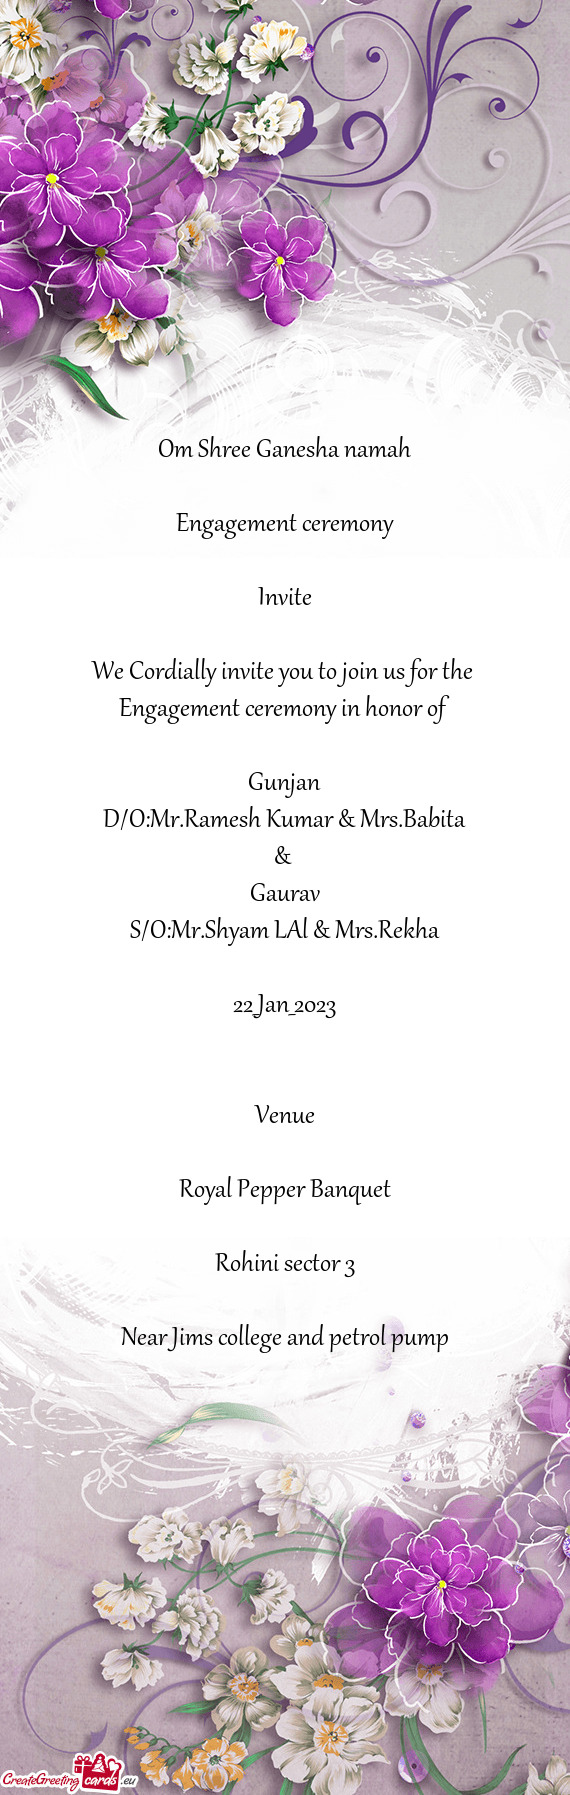 Engagement ceremony in honor of